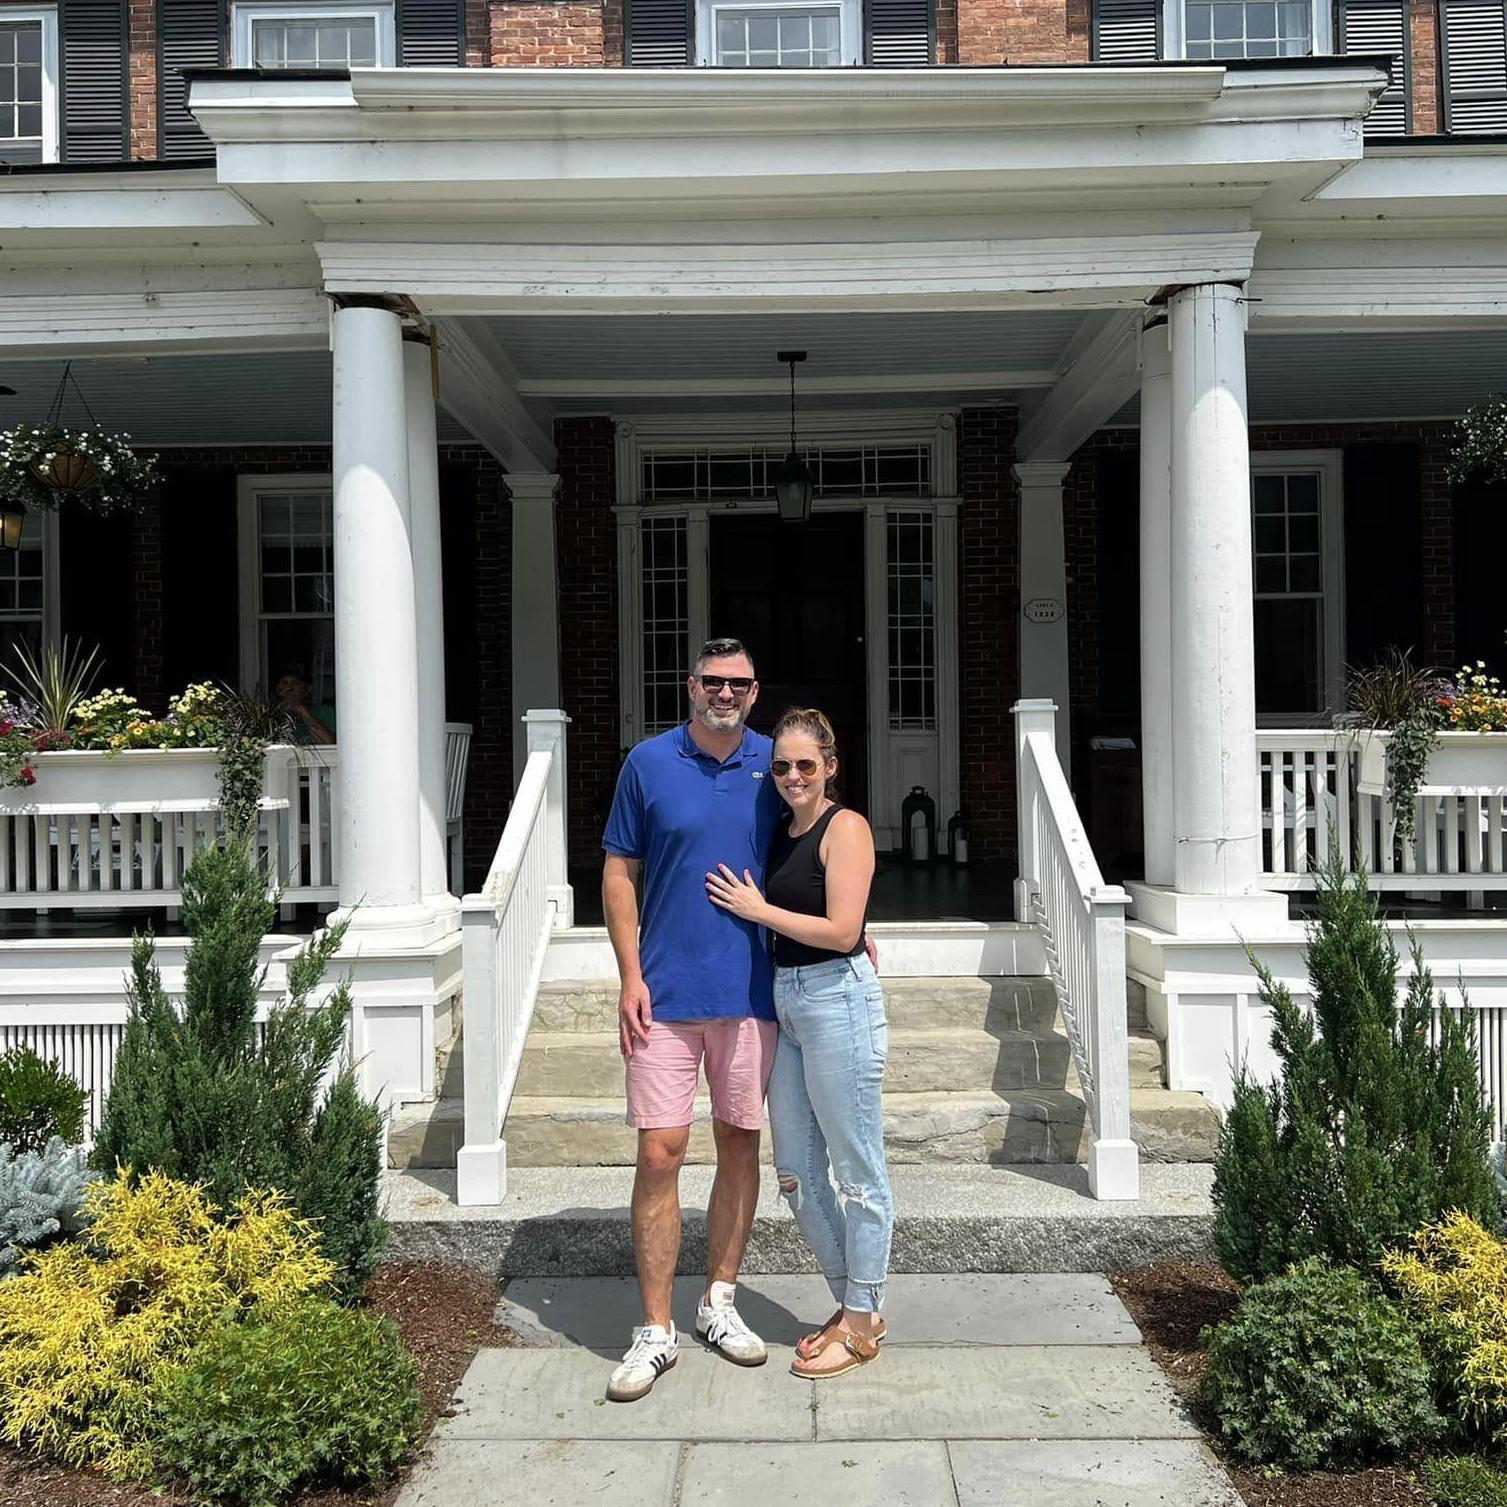 We got engaged in Woodstock, Vermont